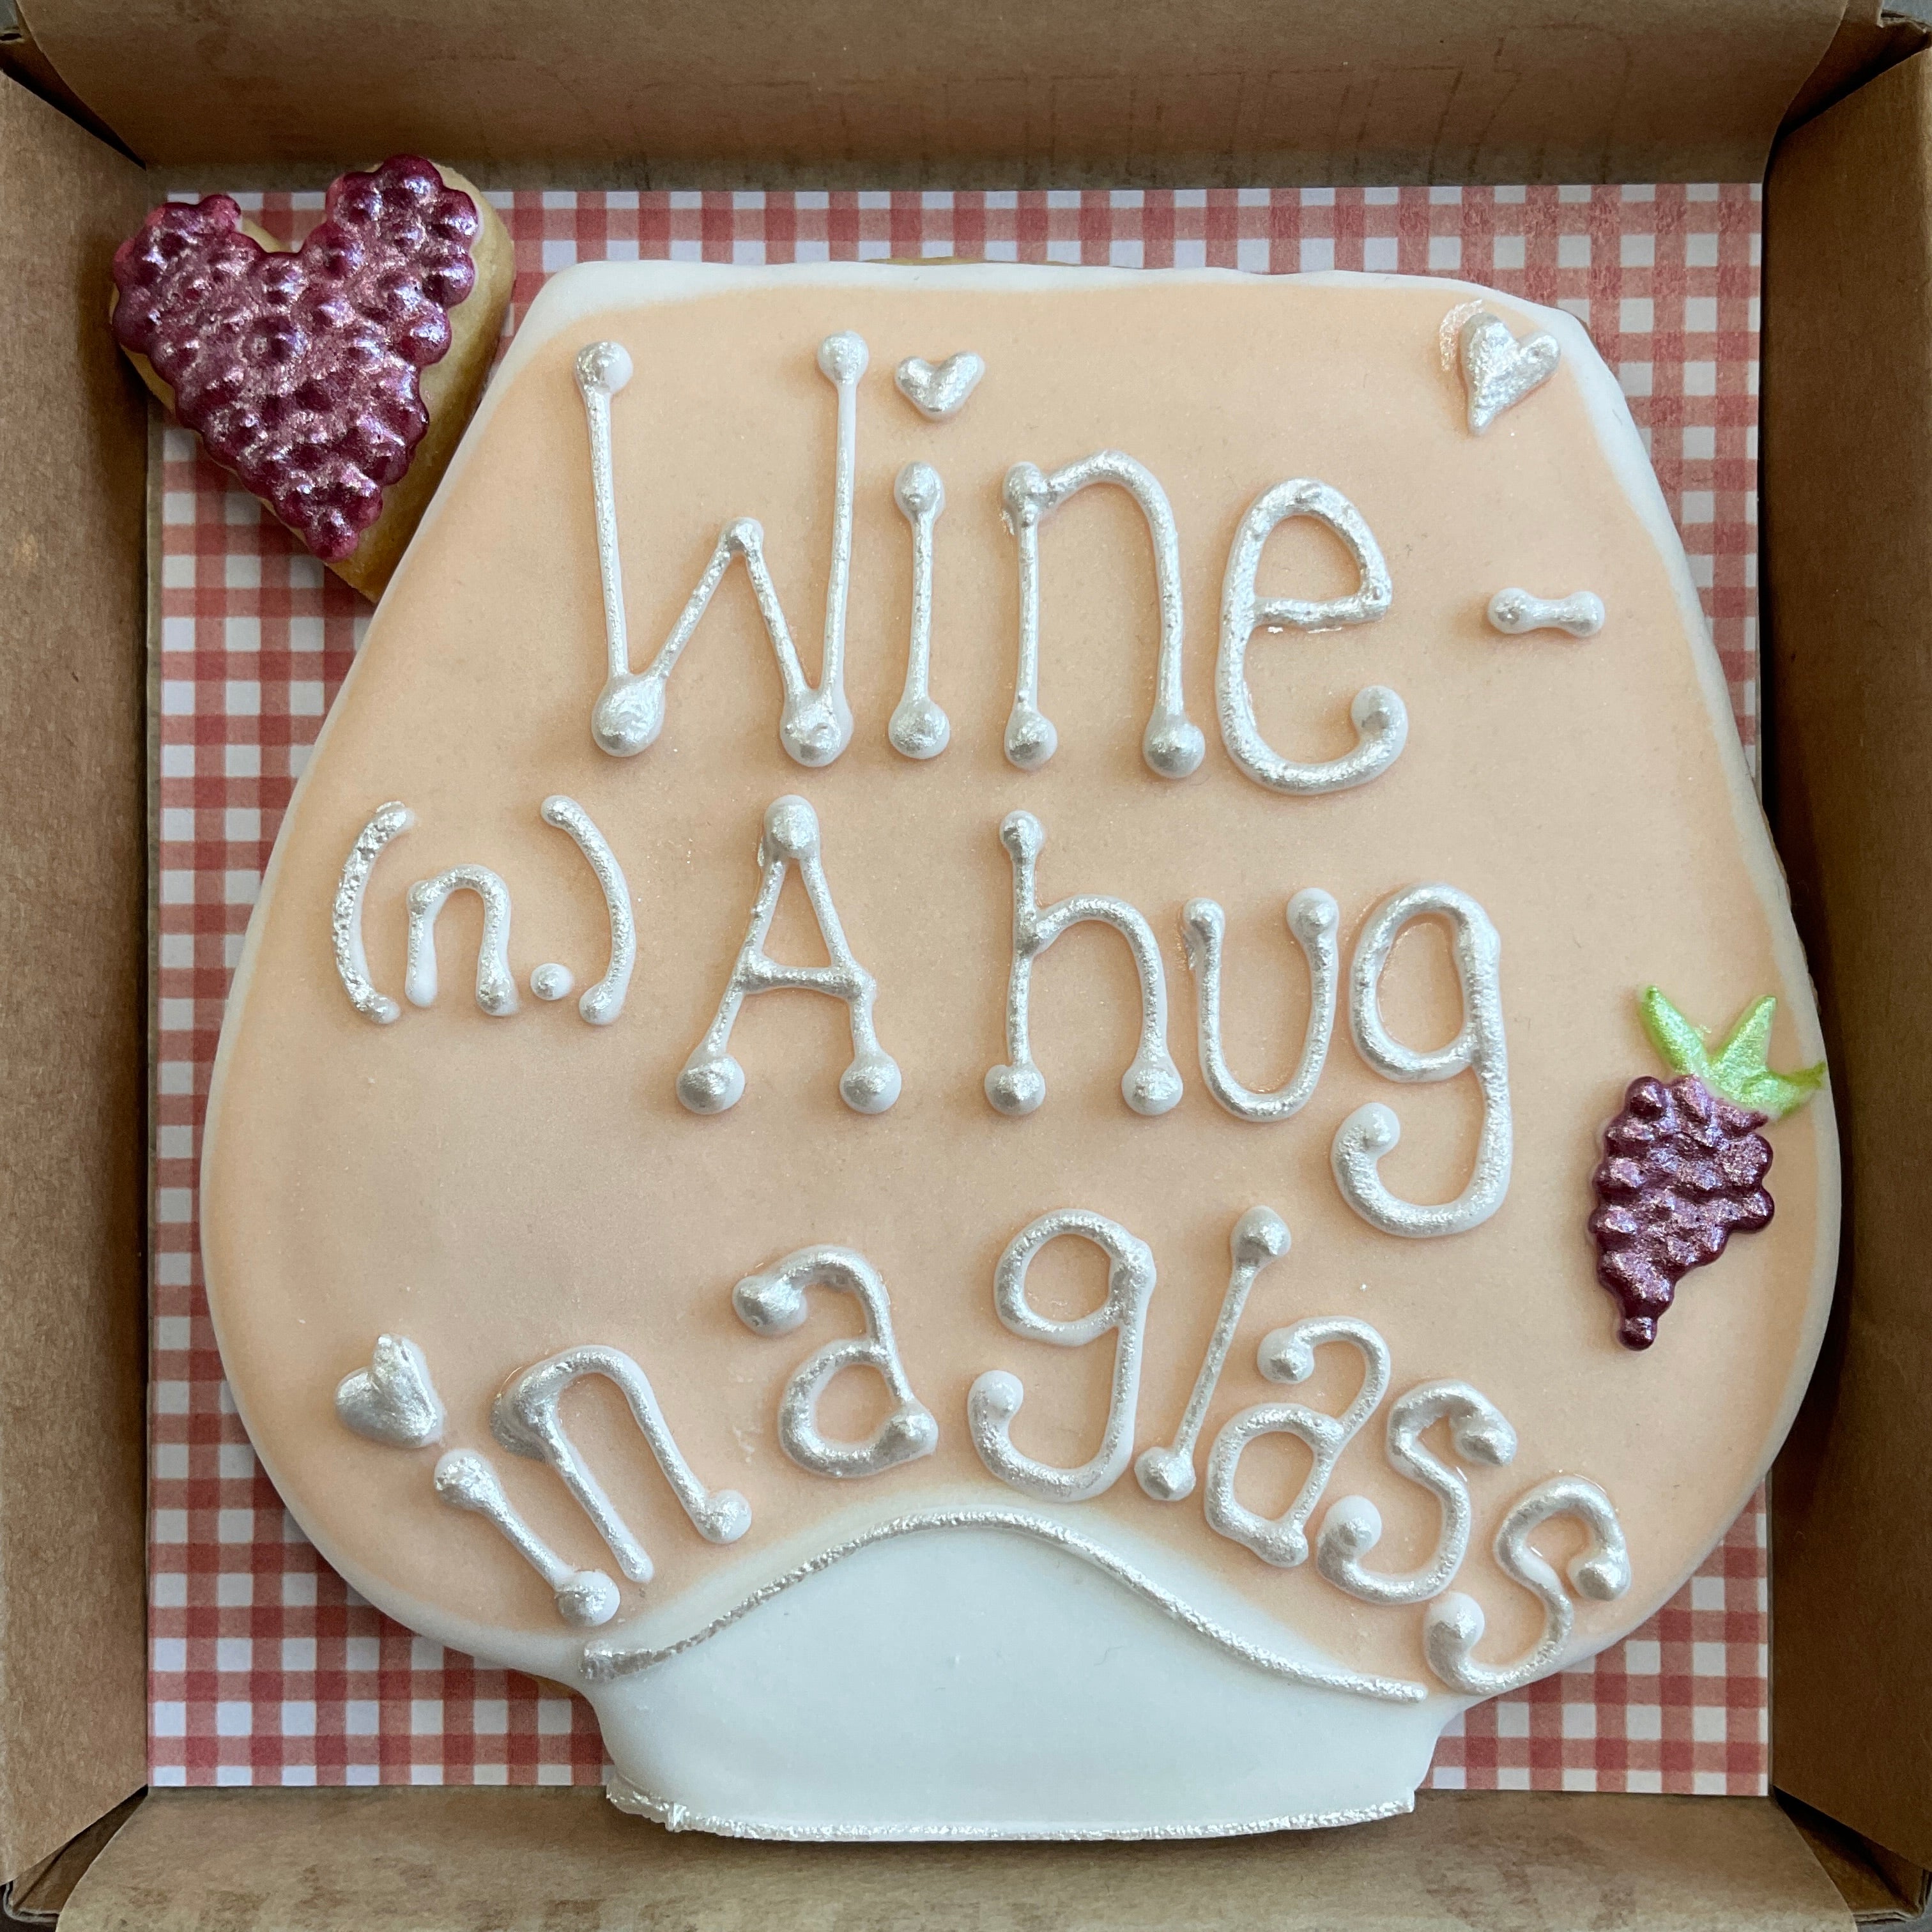 Delicious personalised cookies / biscuits for wine lovers. Letterbox cookies for any celebration. Perfect for wine lovers, hen parties, hen do, birthday cookies, letterbox gift